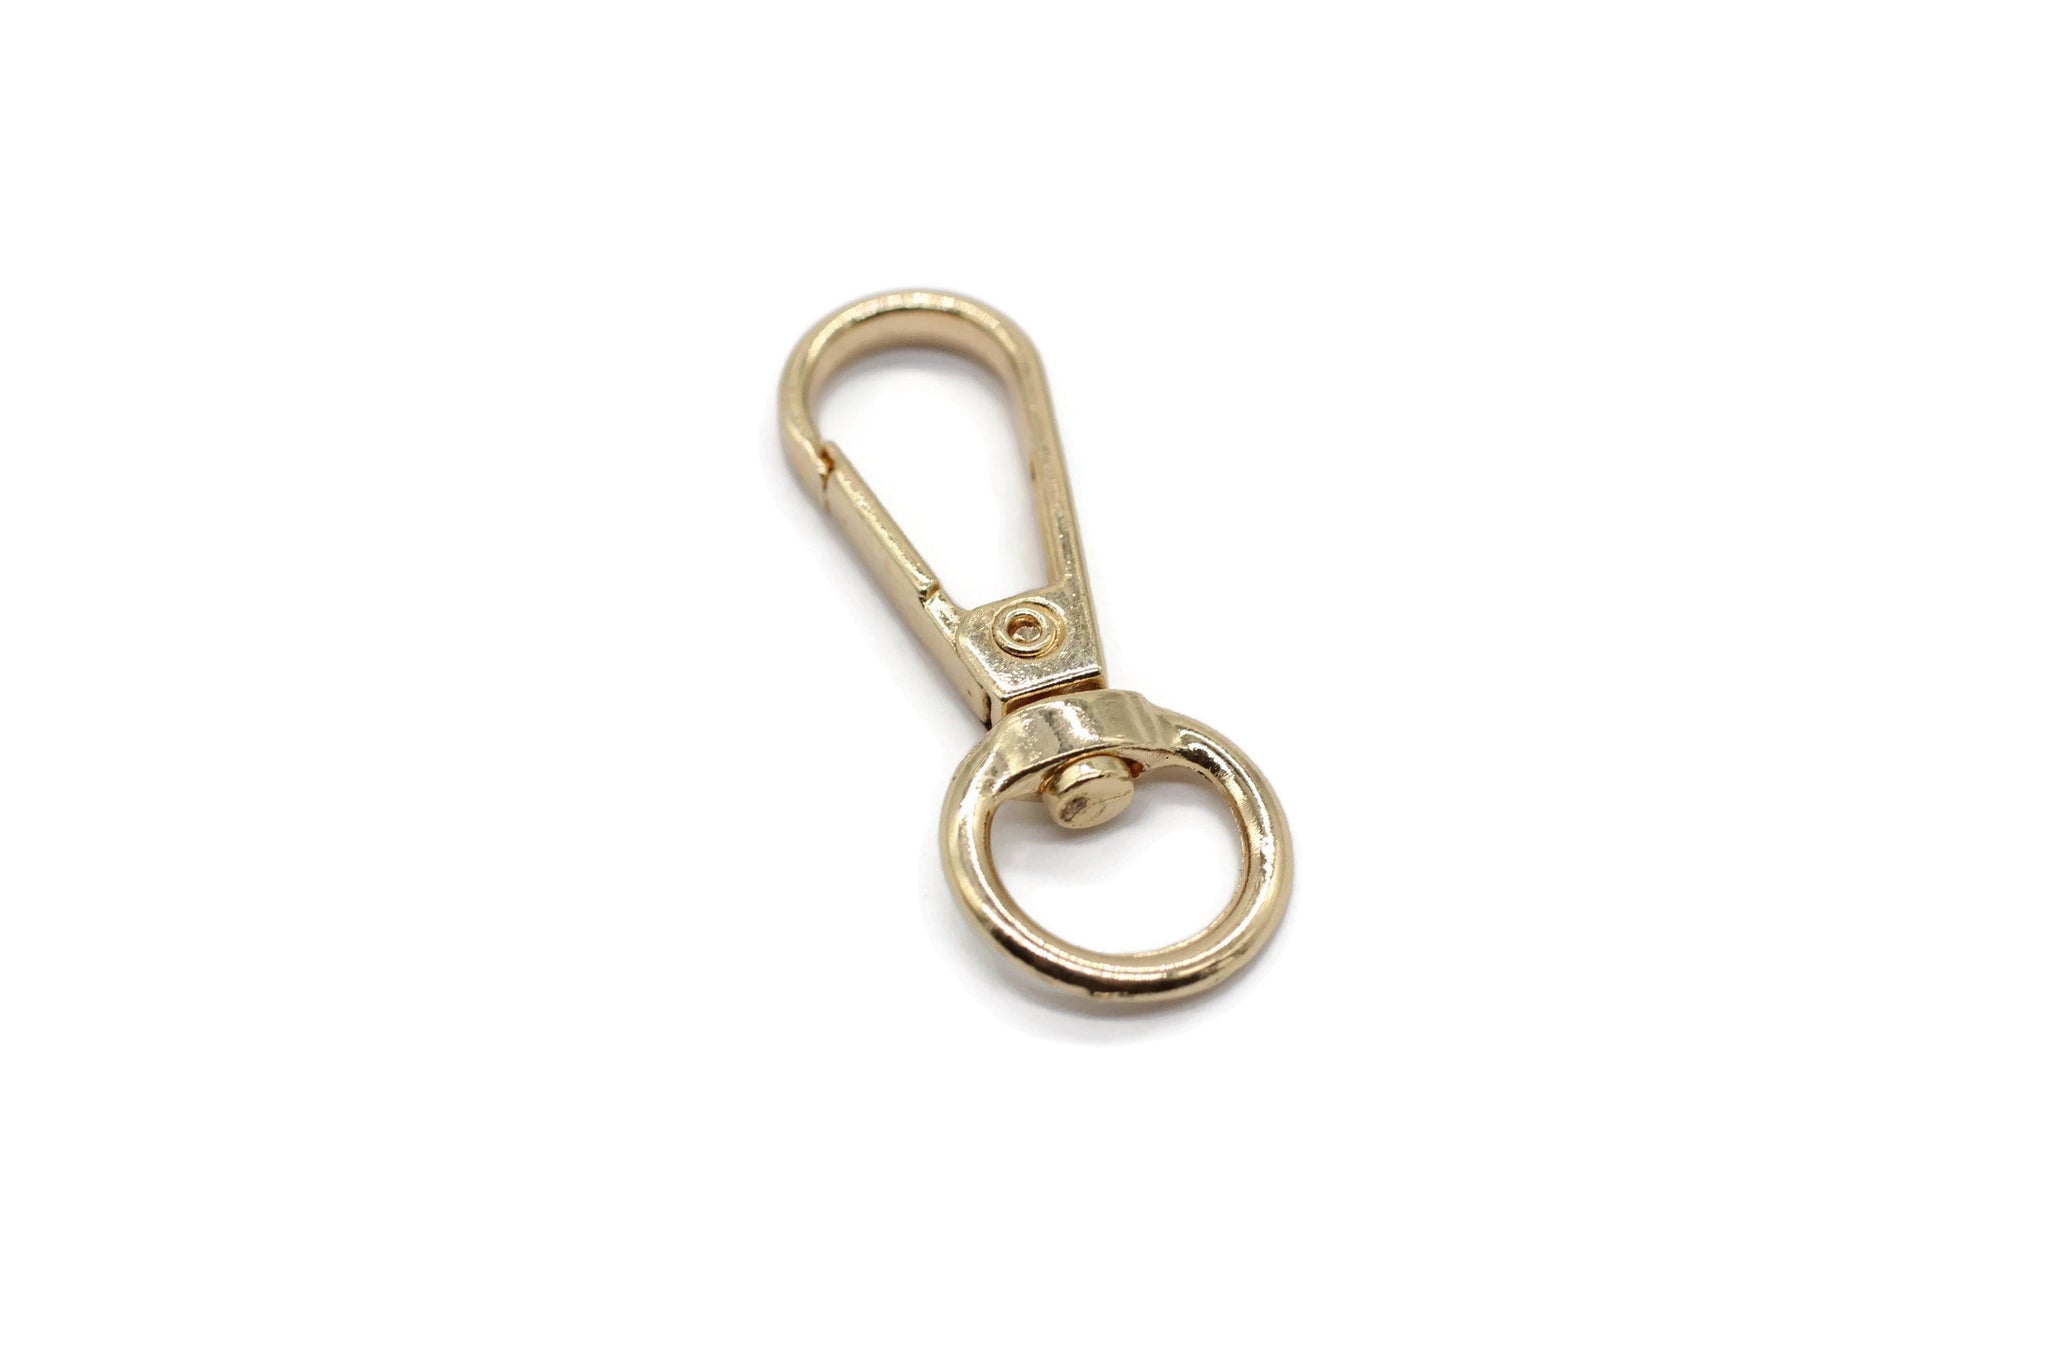 Gold Tone Bag Buckle 39 mm(1.54 inch), Basic Hardware Kit, Swivel Hooks, Metal Buckle, Bag Accessories, Bag Hook, Buckle For Belts And Bags